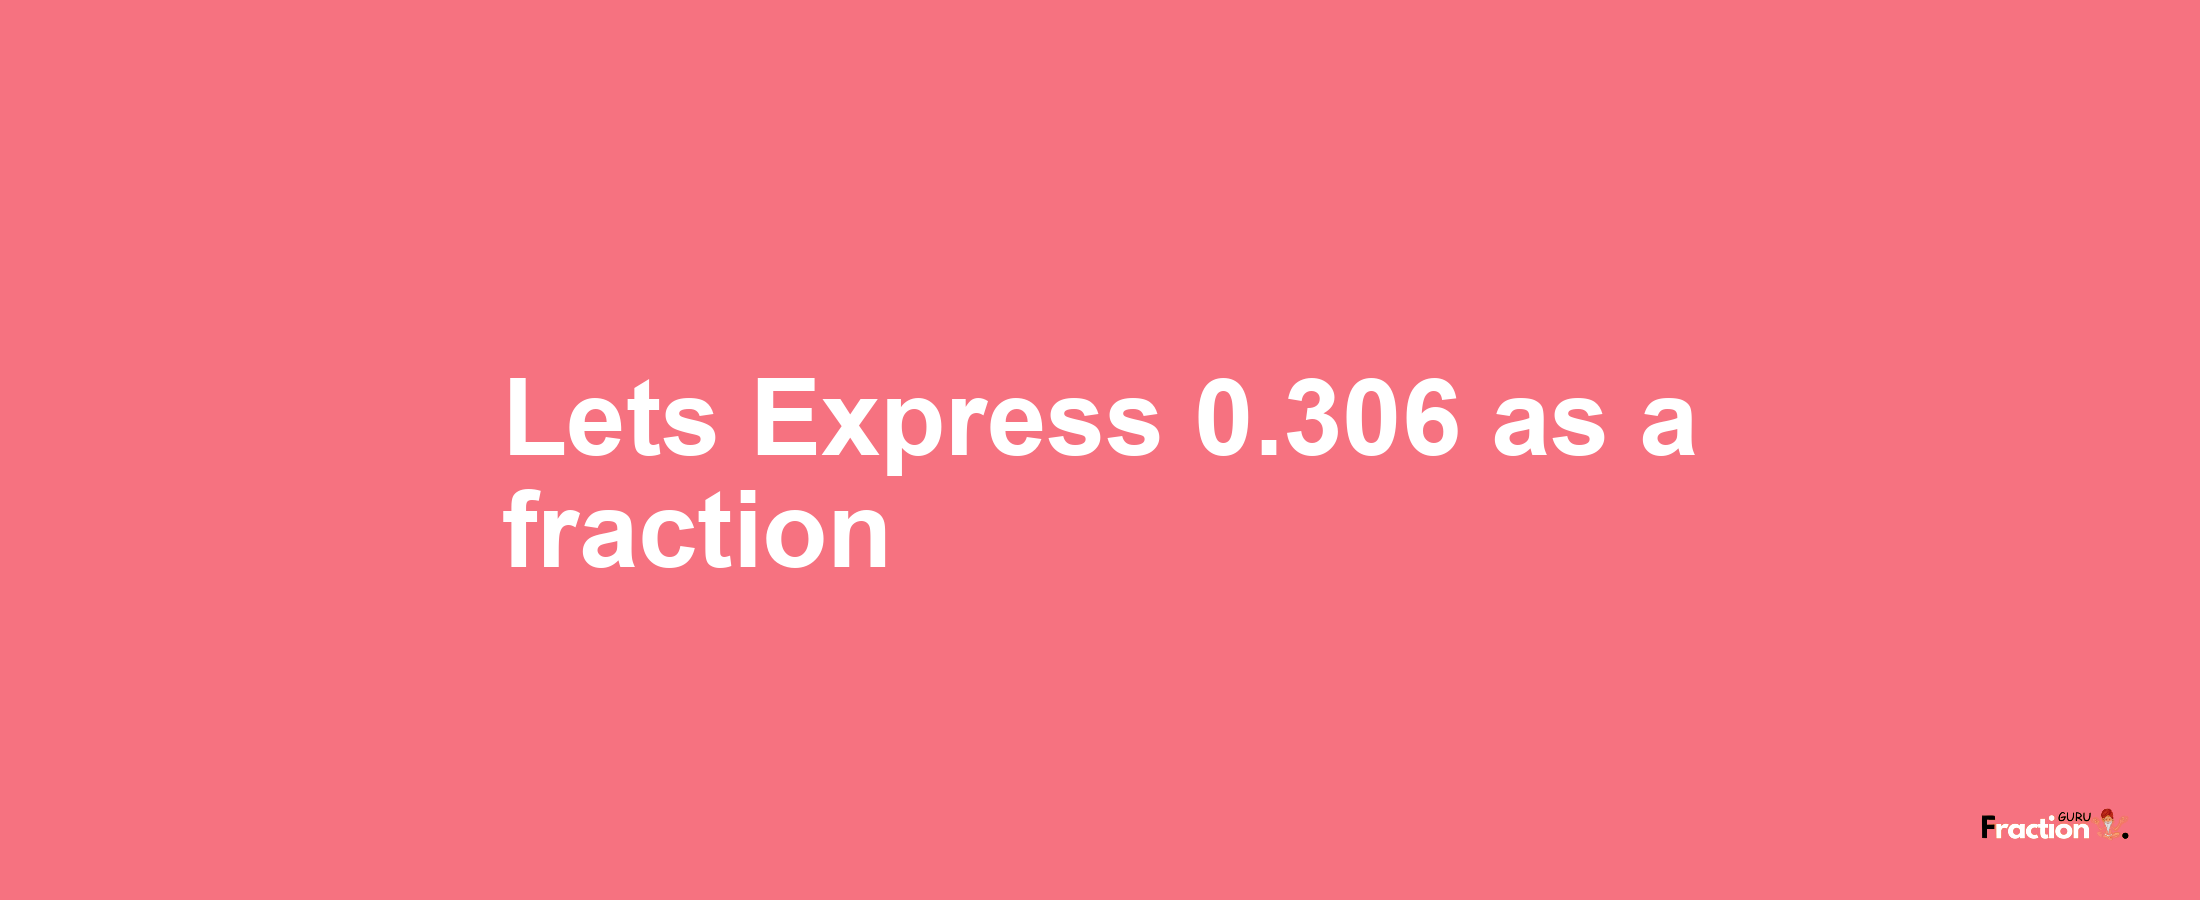 Lets Express 0.306 as afraction